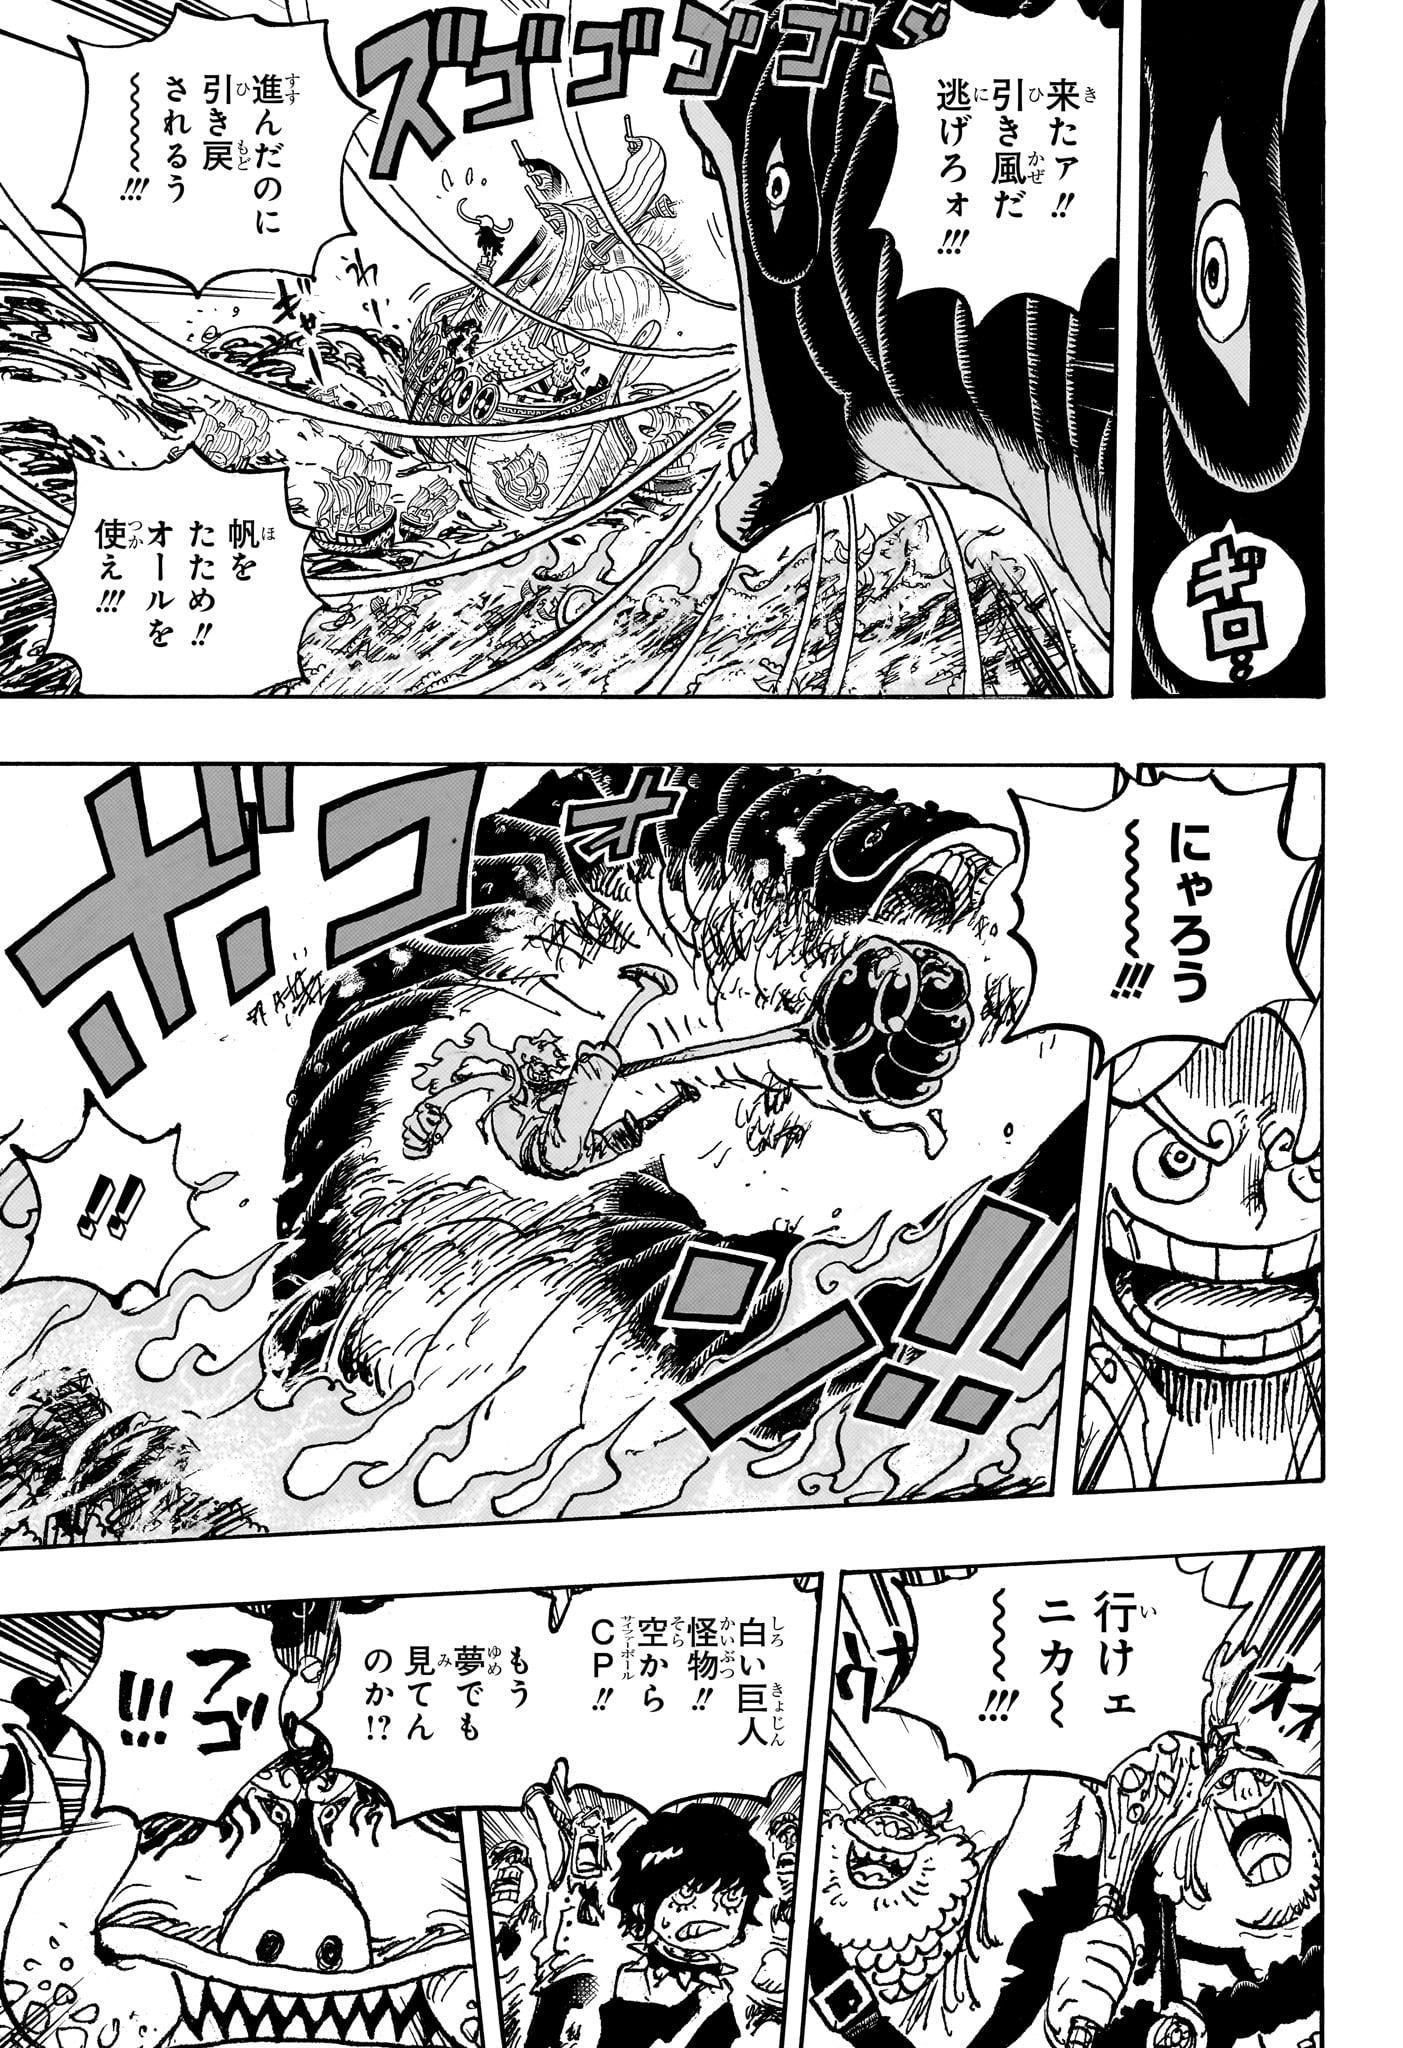 One Piece - Chapter 1119 - Page 11